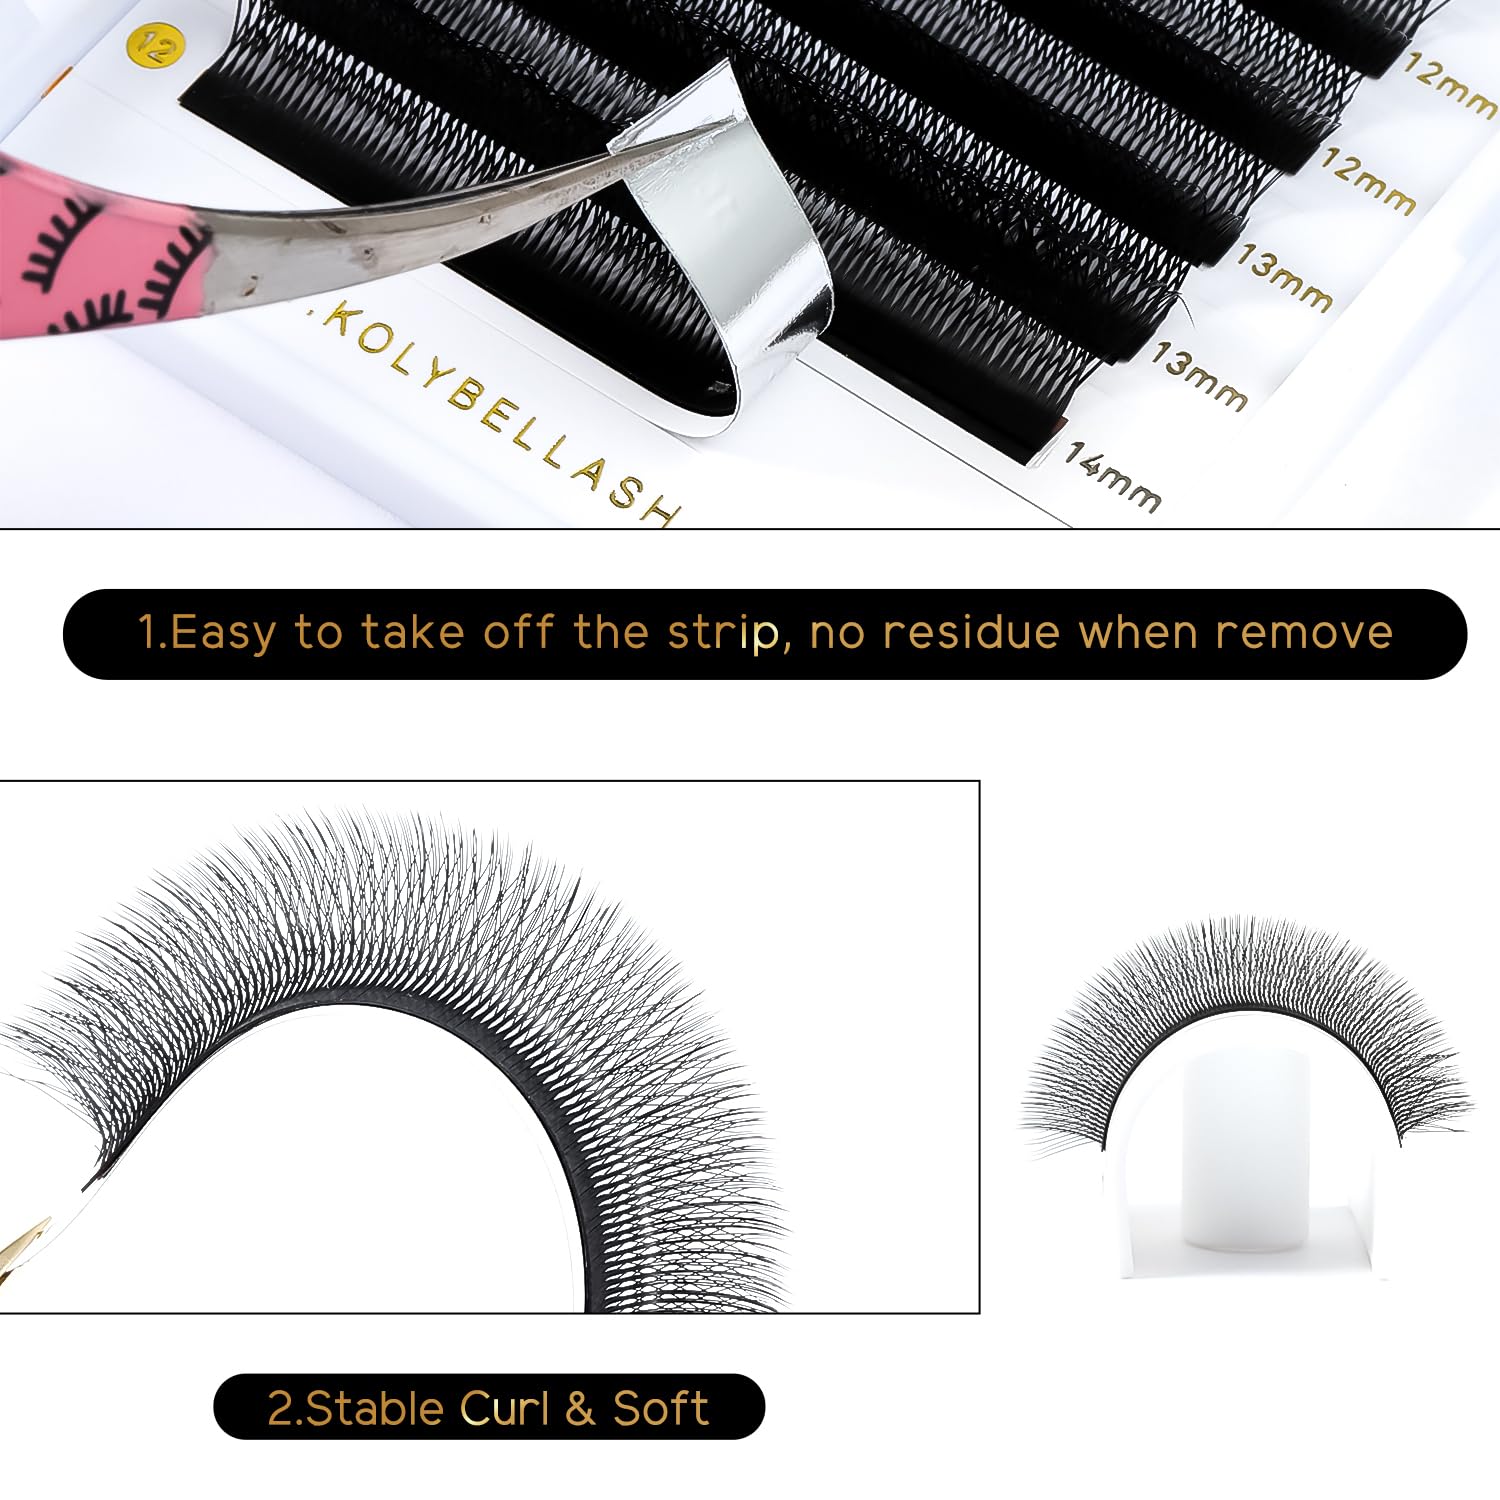 Premade Fans Eyelash Extensions 1000 Promade Loose Fans 9-16mm Mixed Length 10D Premade Fans C/D Curl Pointed Thin Base Handmade Volume Premade Lash Extensions Fans(10D-0.07D,9-16mm)